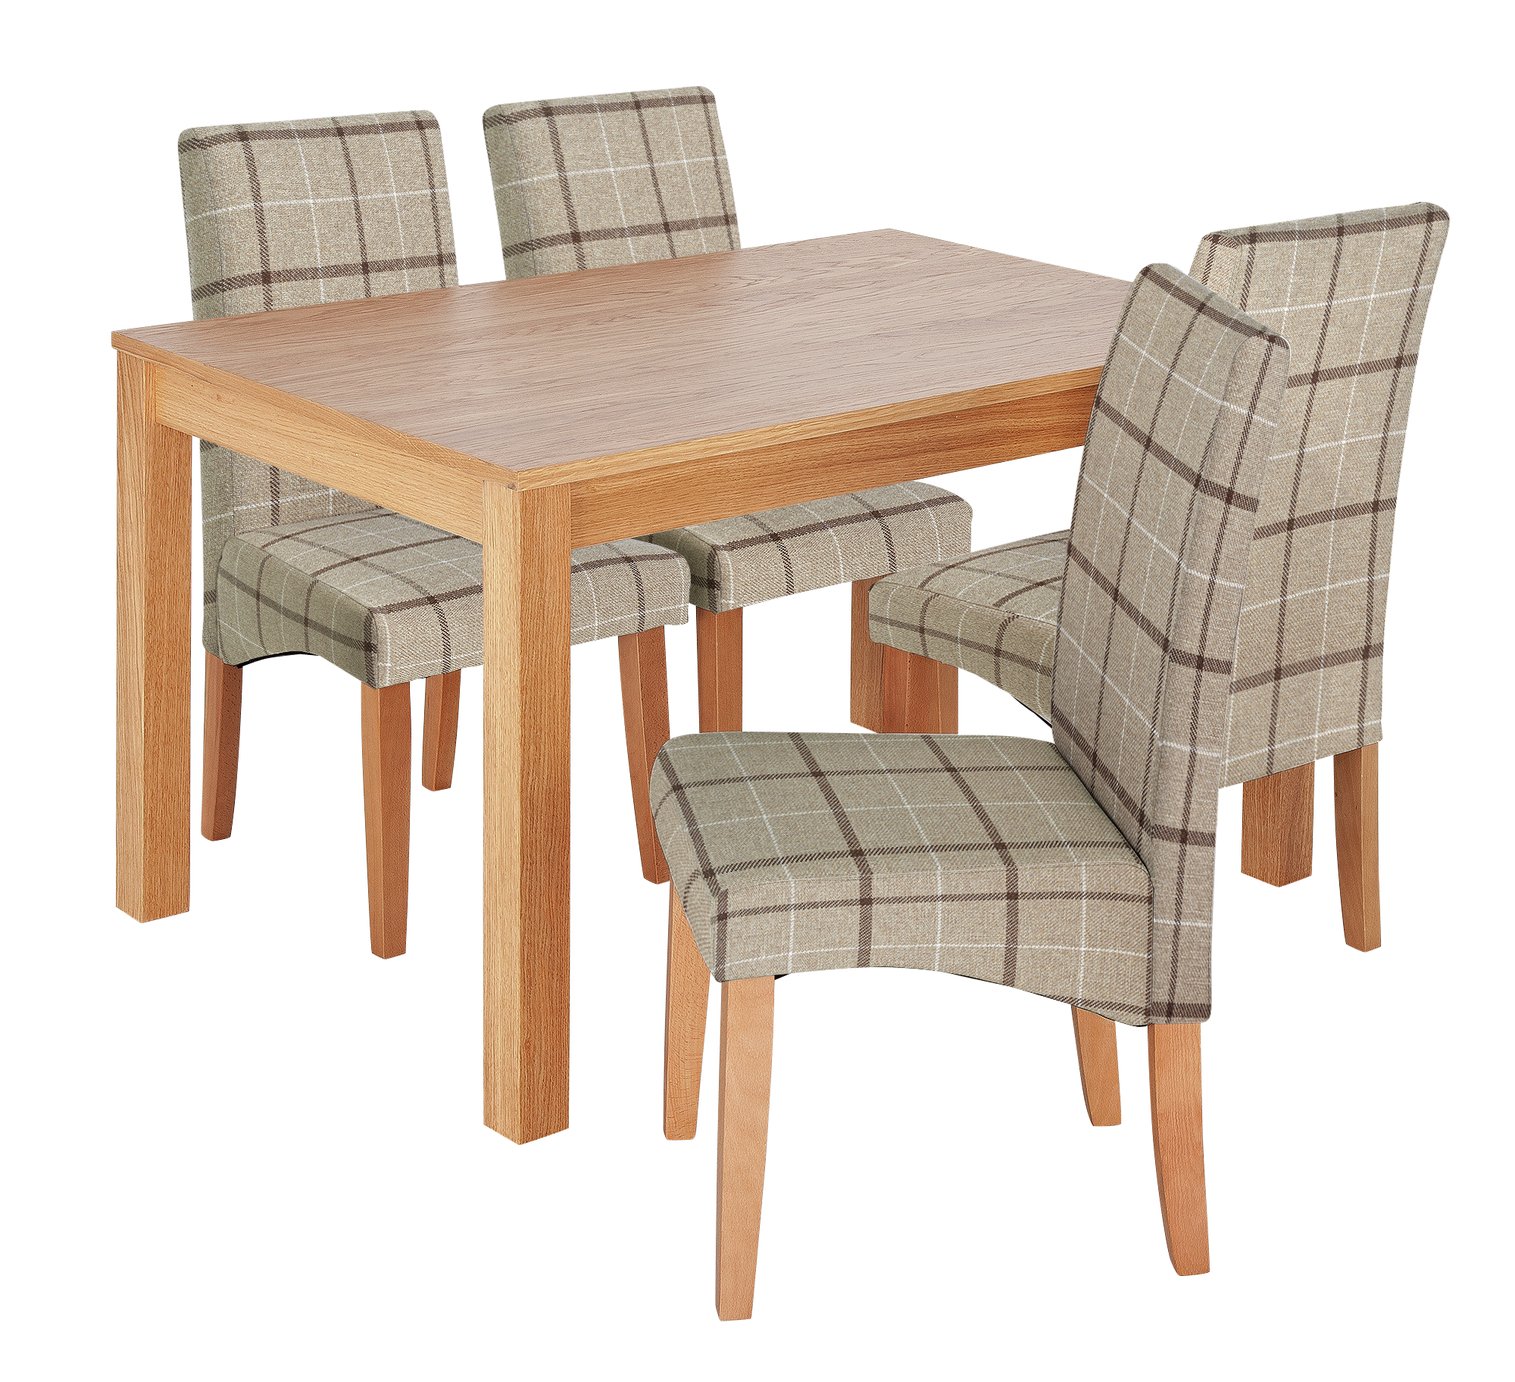 Argos Home Clifton Oak Dining Table & 4 Mink Check Chairs